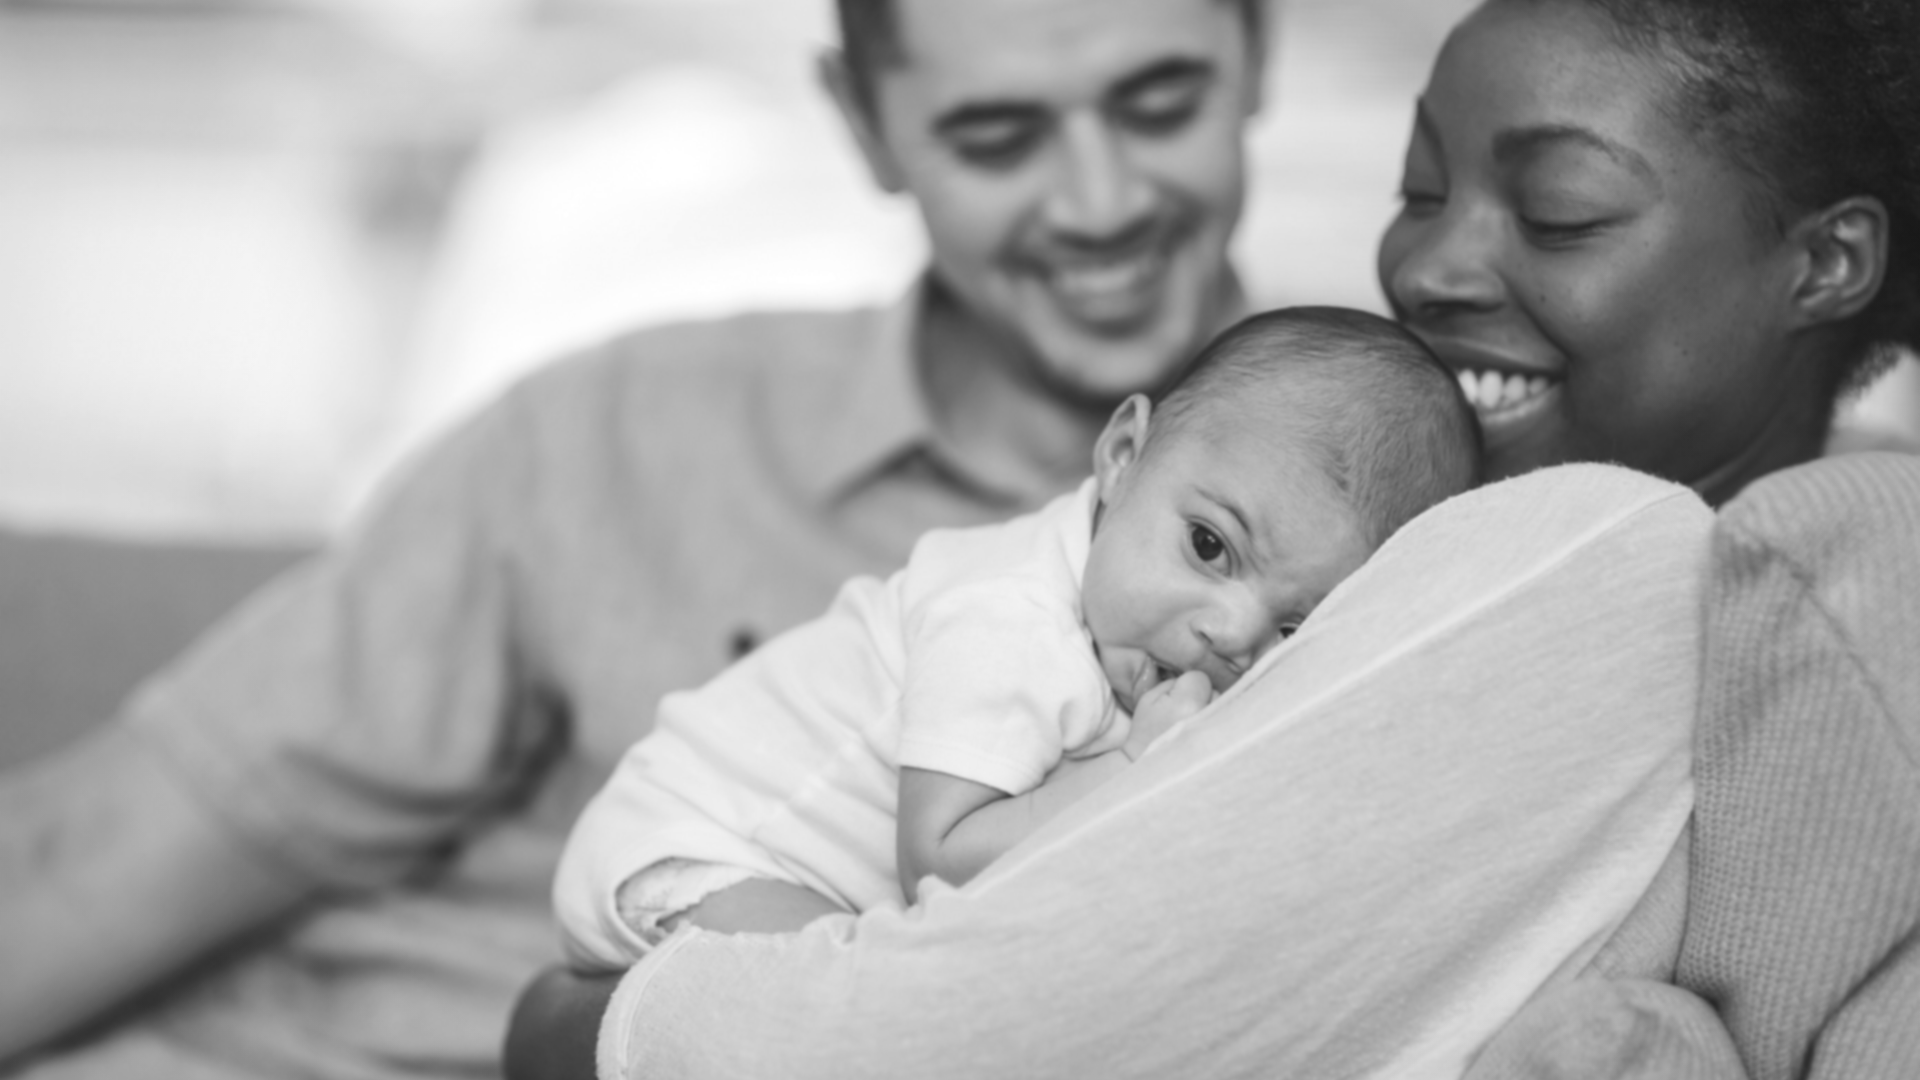 Black and white image of new family. Happy dad looks on while happy mom holds infant baby. Birth Order Bundles of Joy.